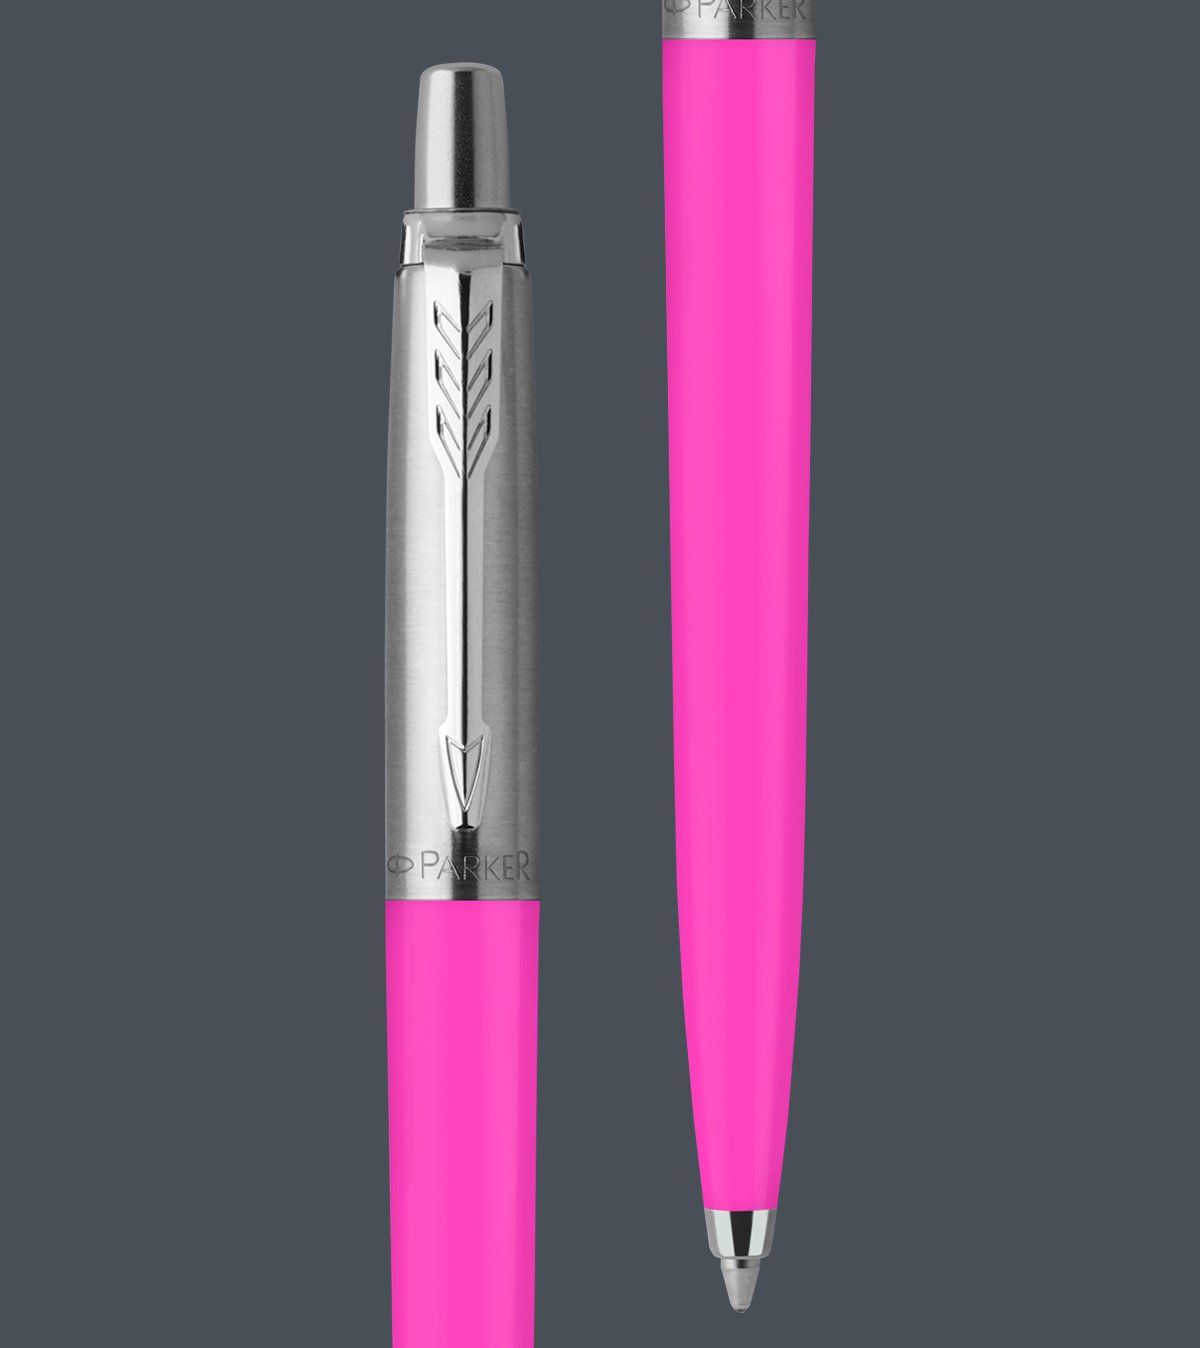 Two upright Jotter Originals ballpoint pens with chrome trim.